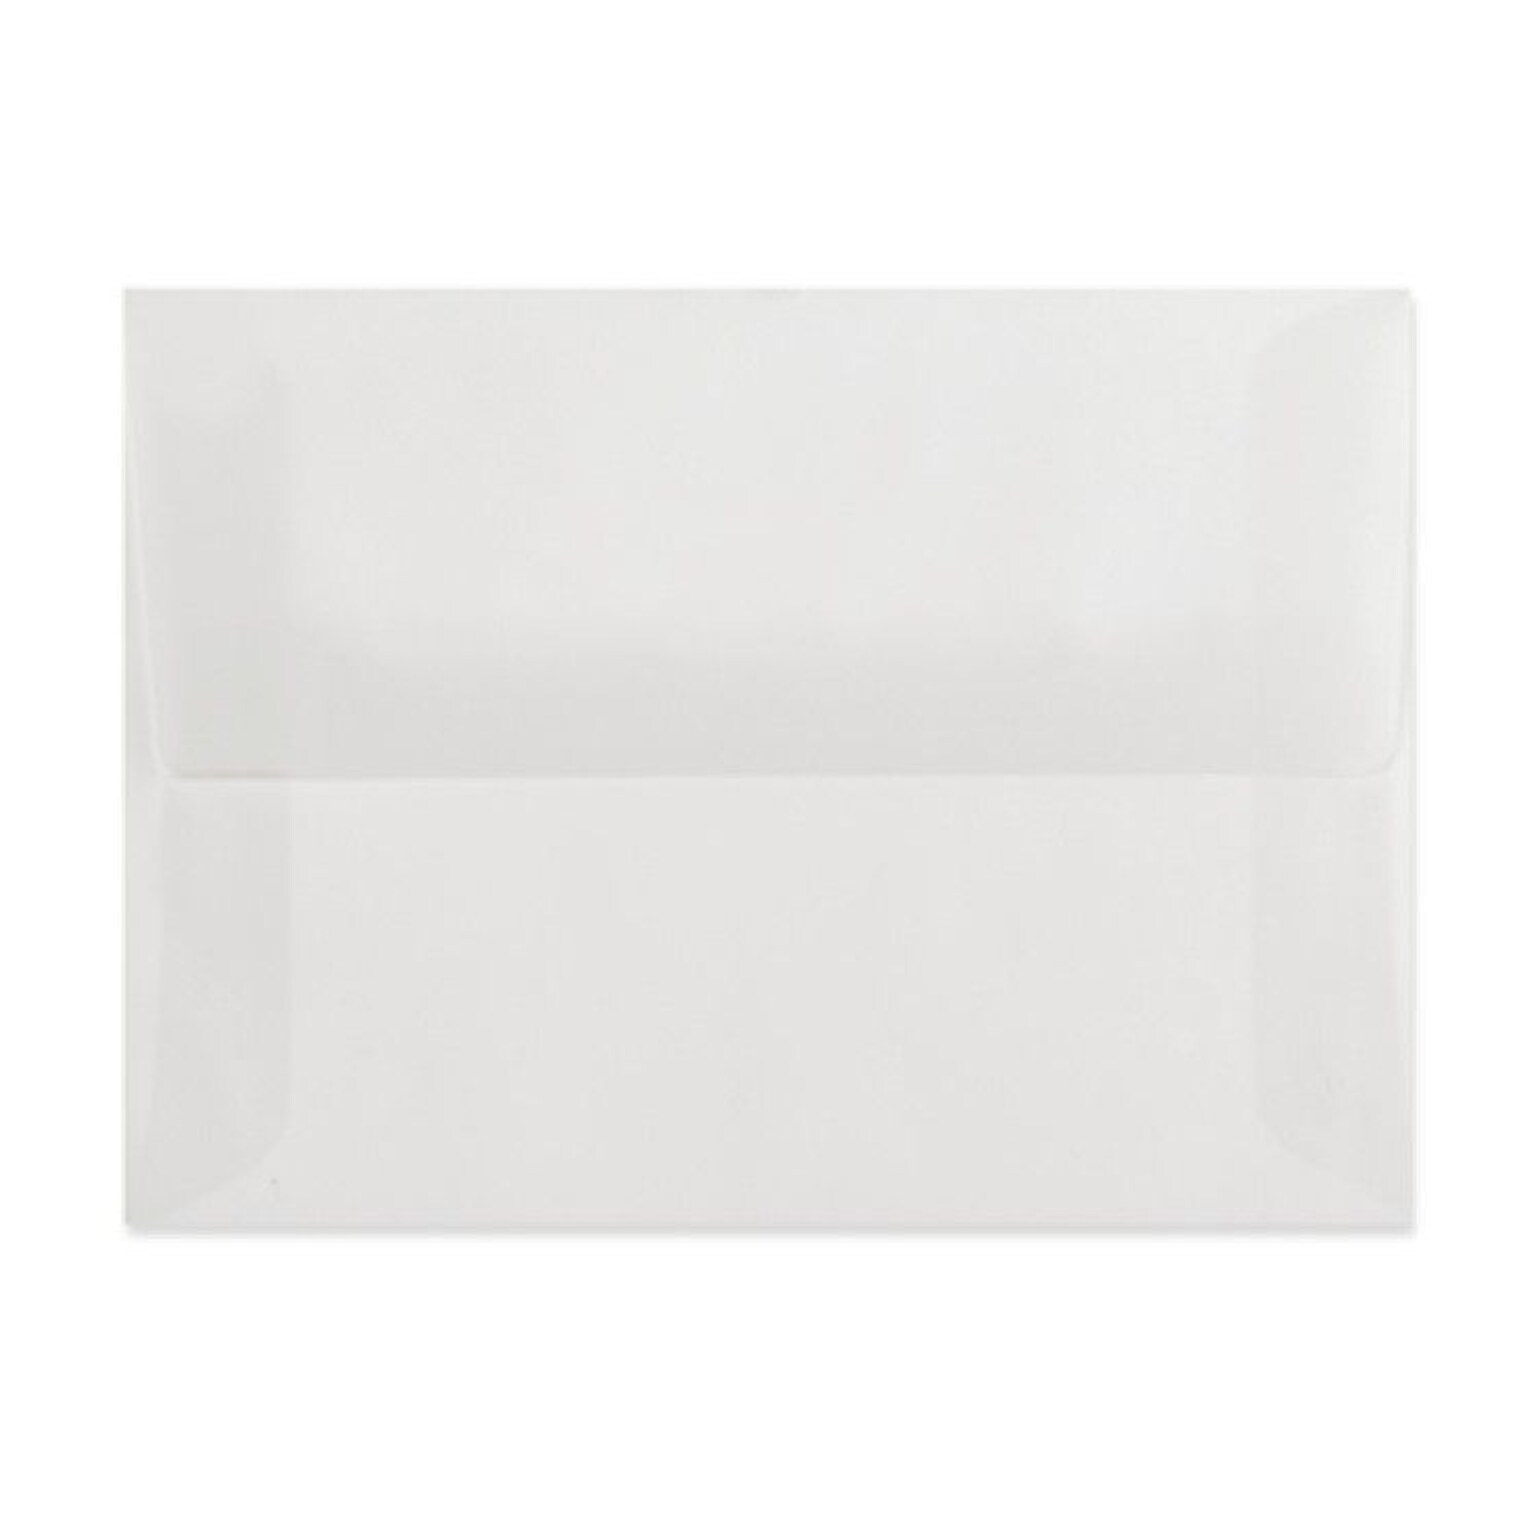 LUX A2 (4 3/8 x 5 3/4) 500/Box, Clear Translucent (4870-00-500)